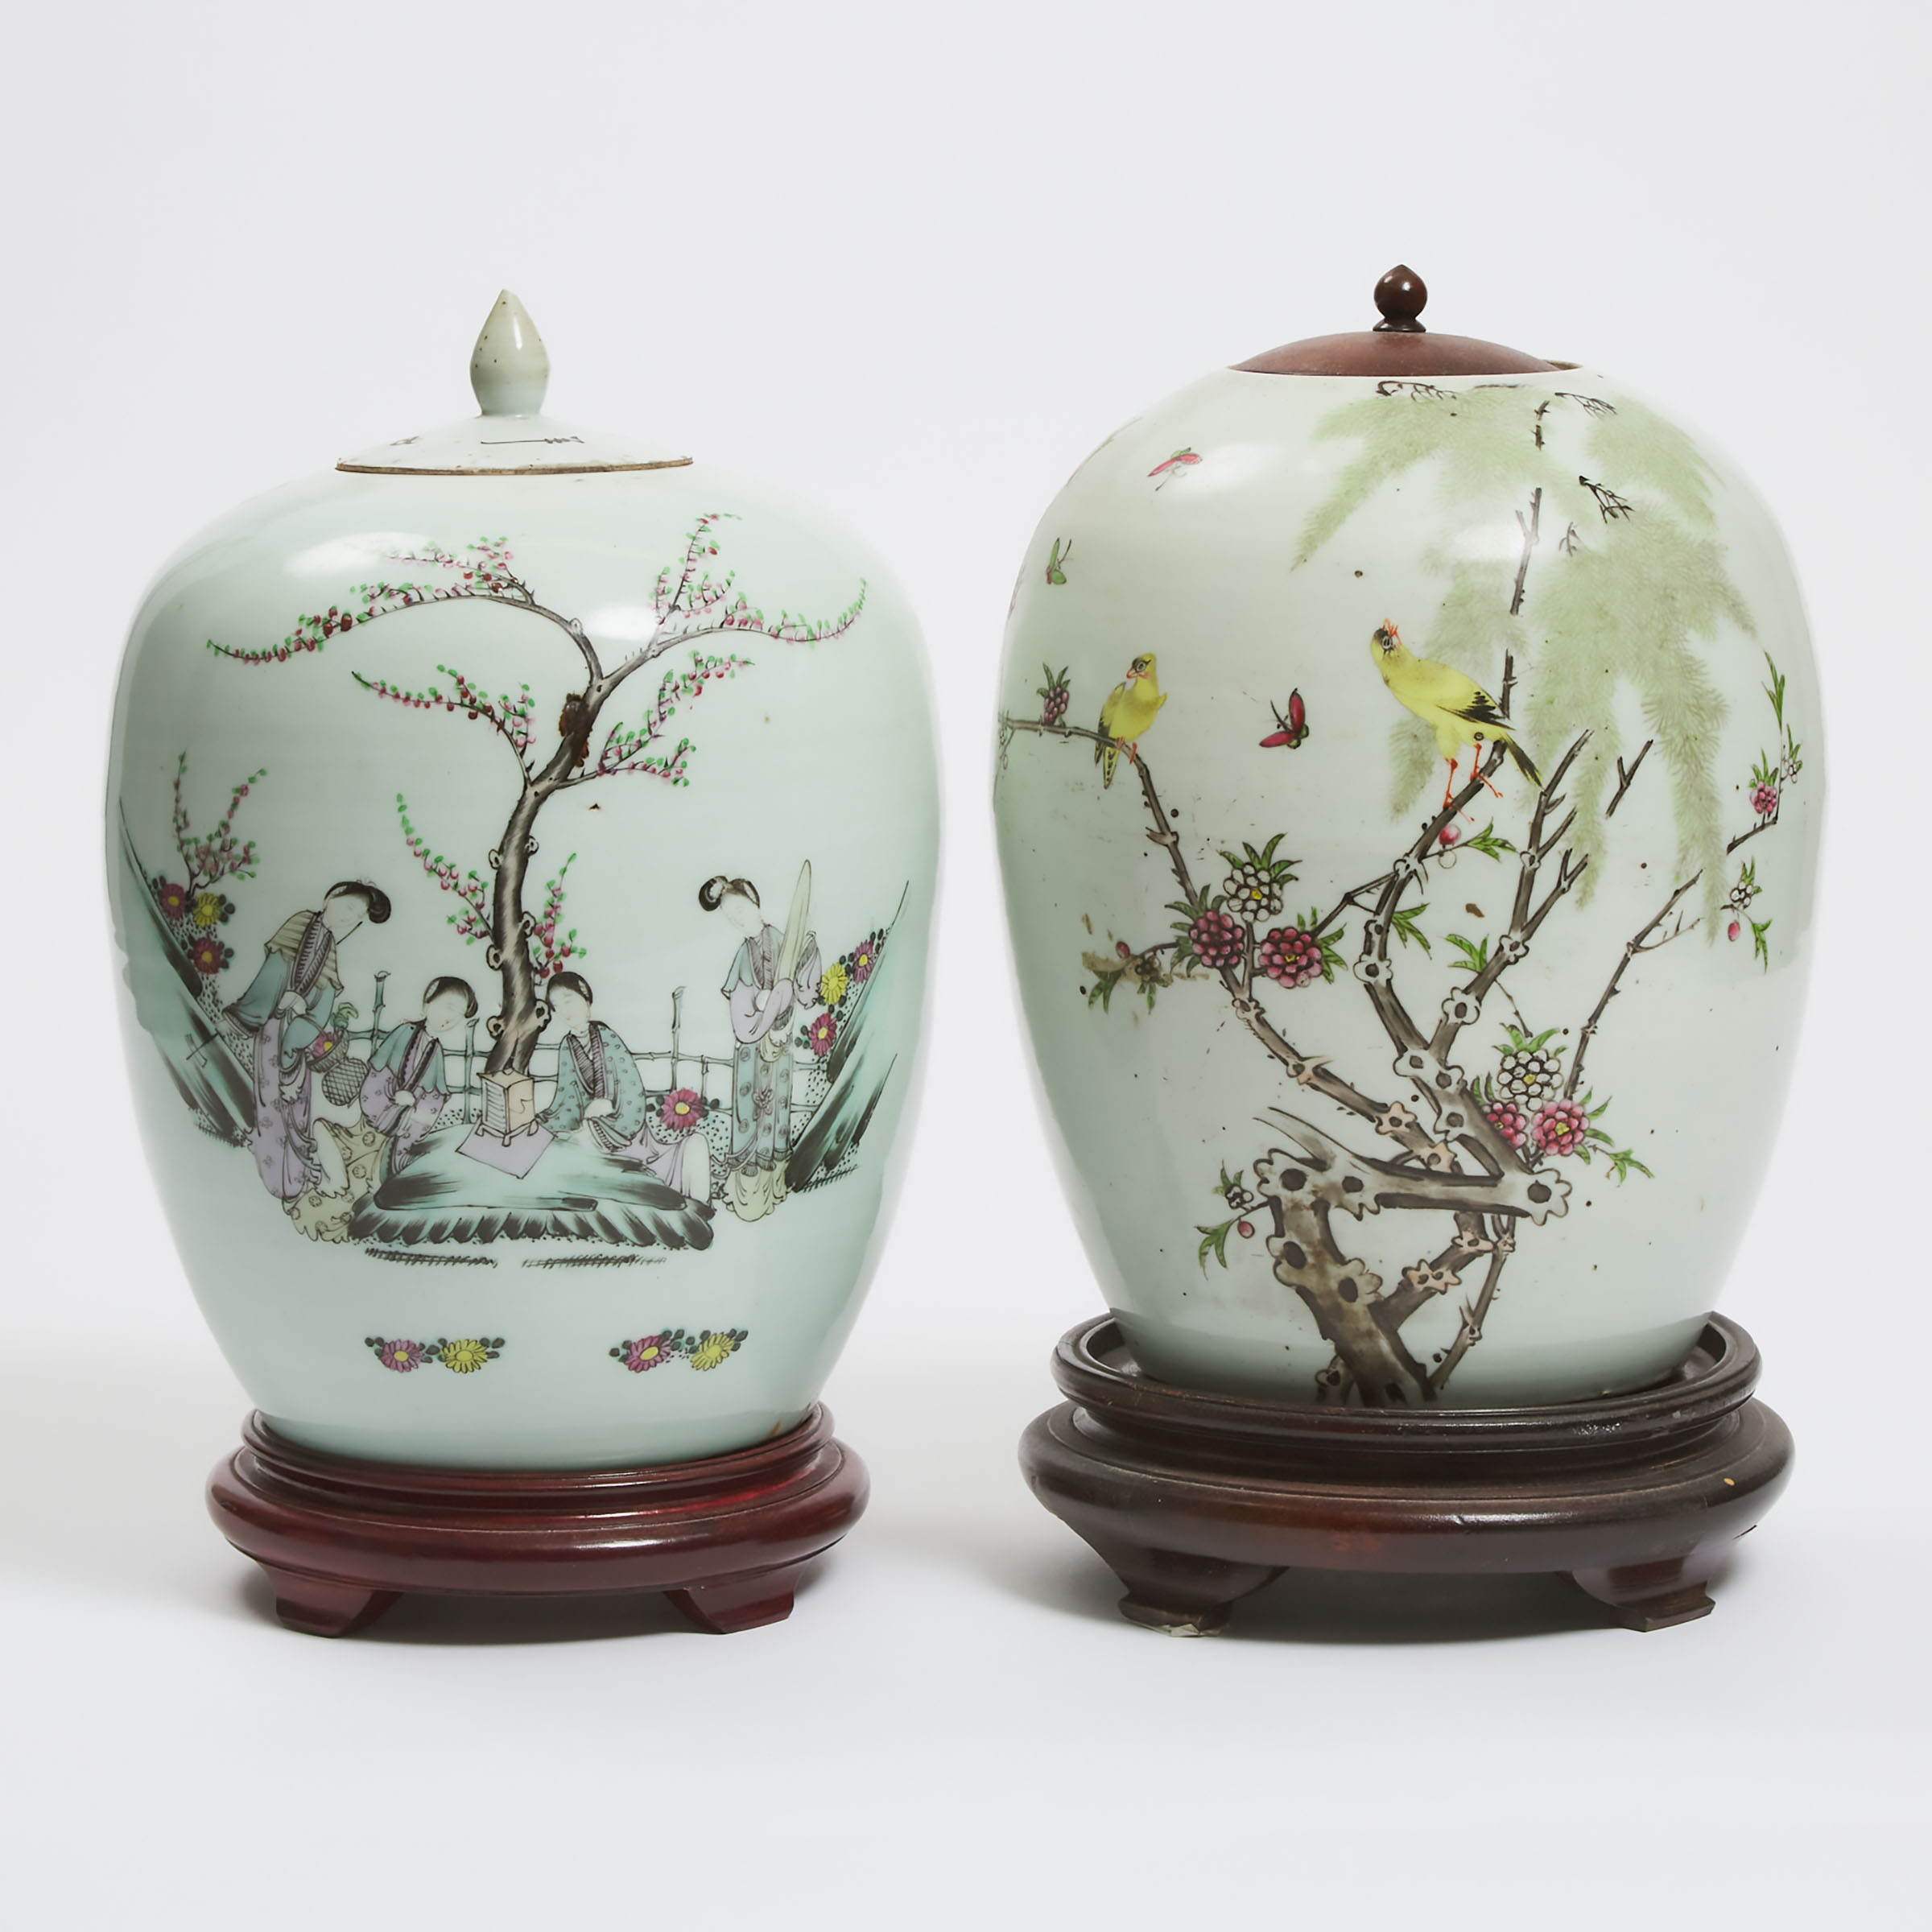 Two Enameled Porcelain Jars With